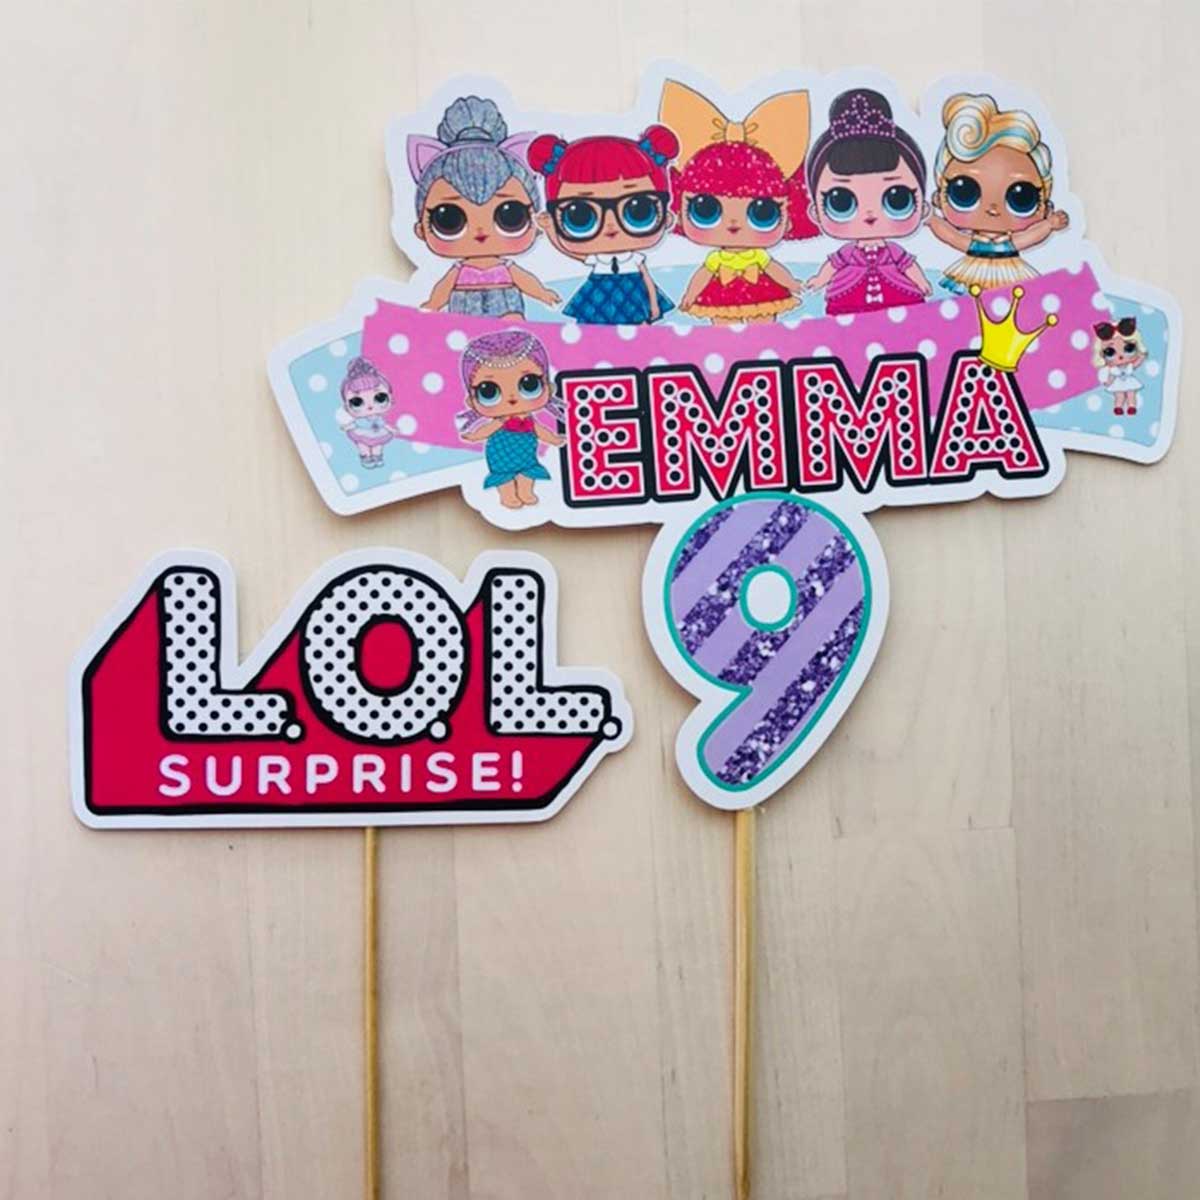 PRINTED AND SHIPPED - LOL Surprise Dolls Shaker Cake T - Fresh Birthday  Designs